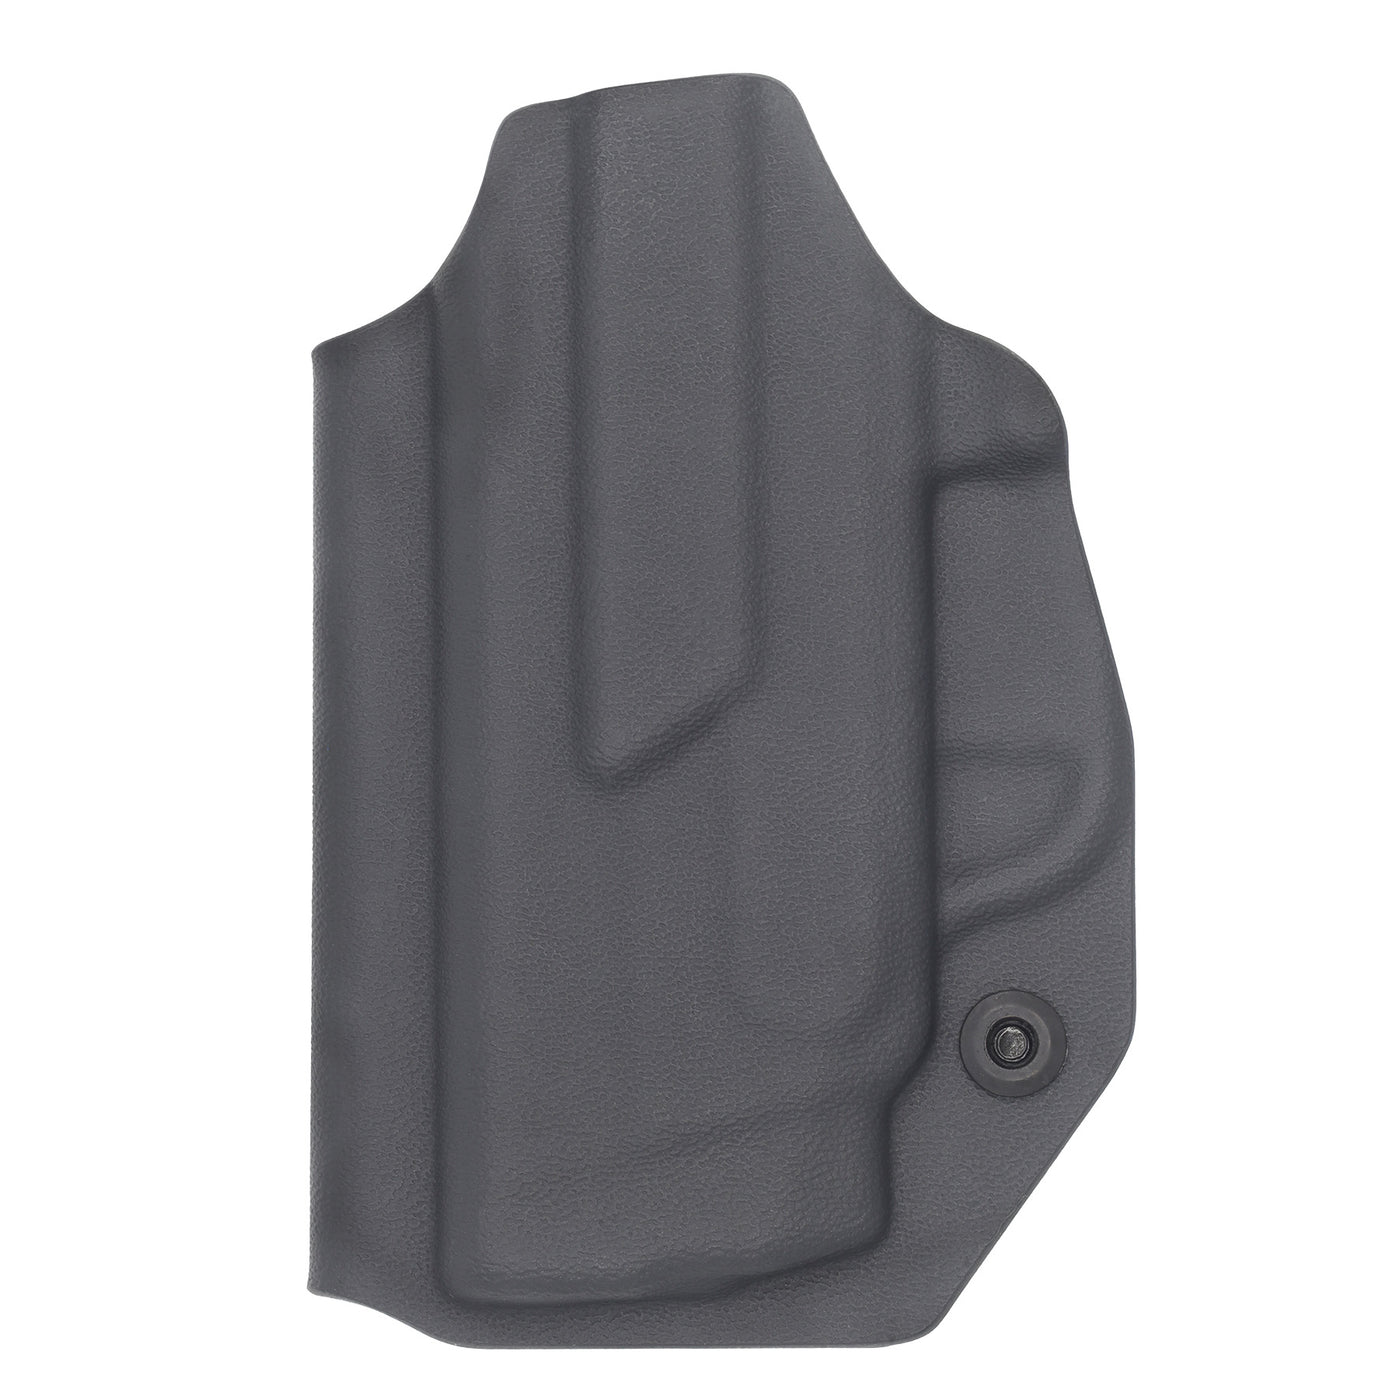 C&G Holsters quick ship Covert IWB kydex holster for Smith & Wesson Bodyguard 380 in black rear view